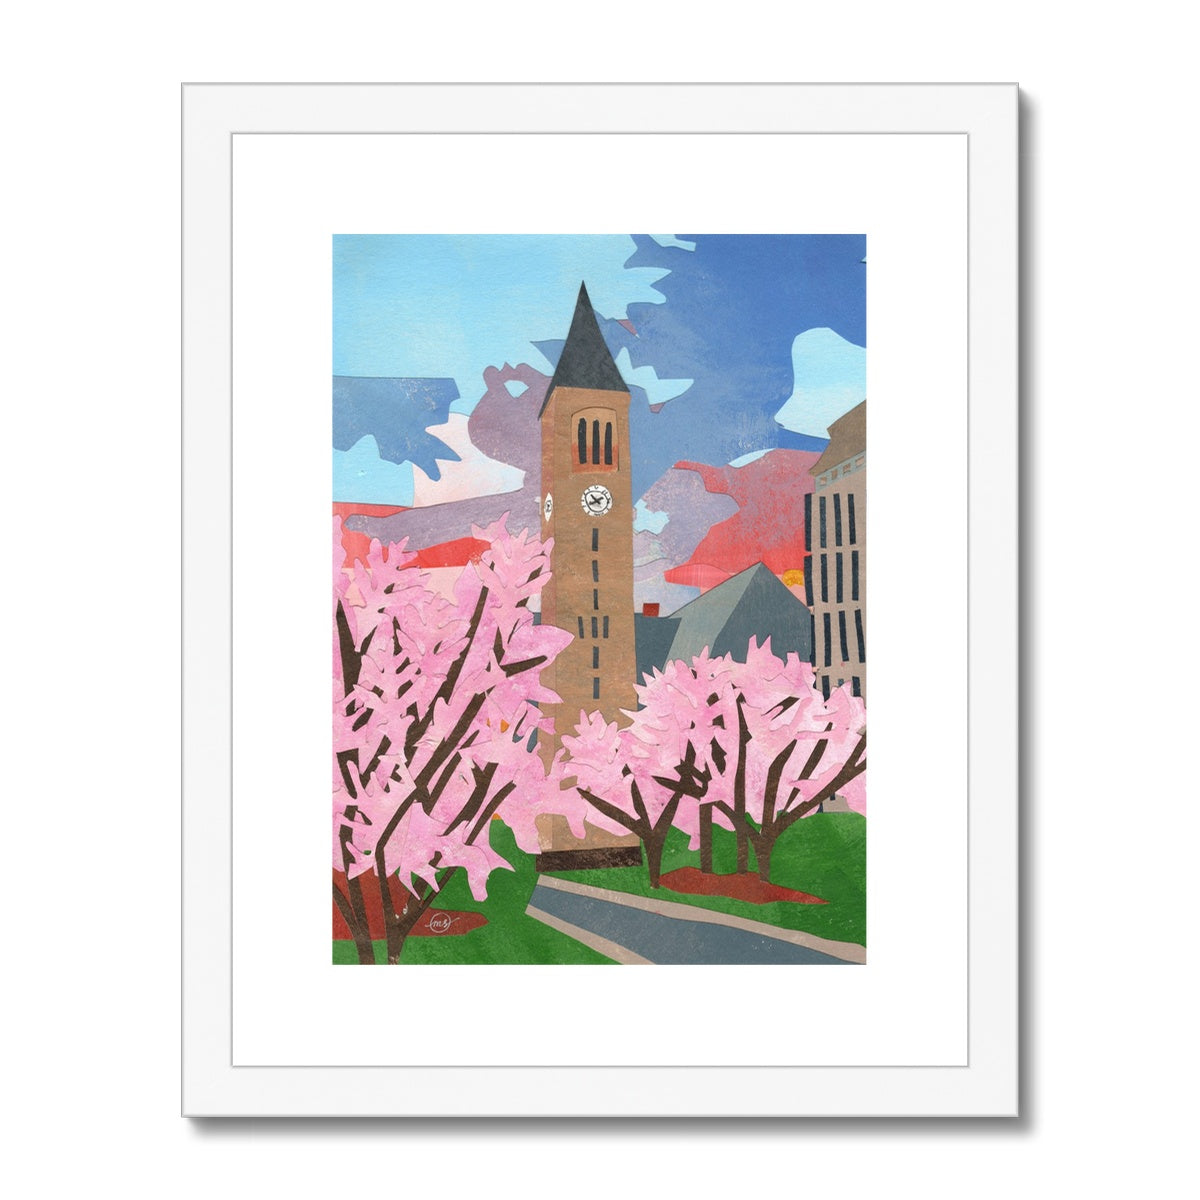 McGraw Tower Framed & Matted Print